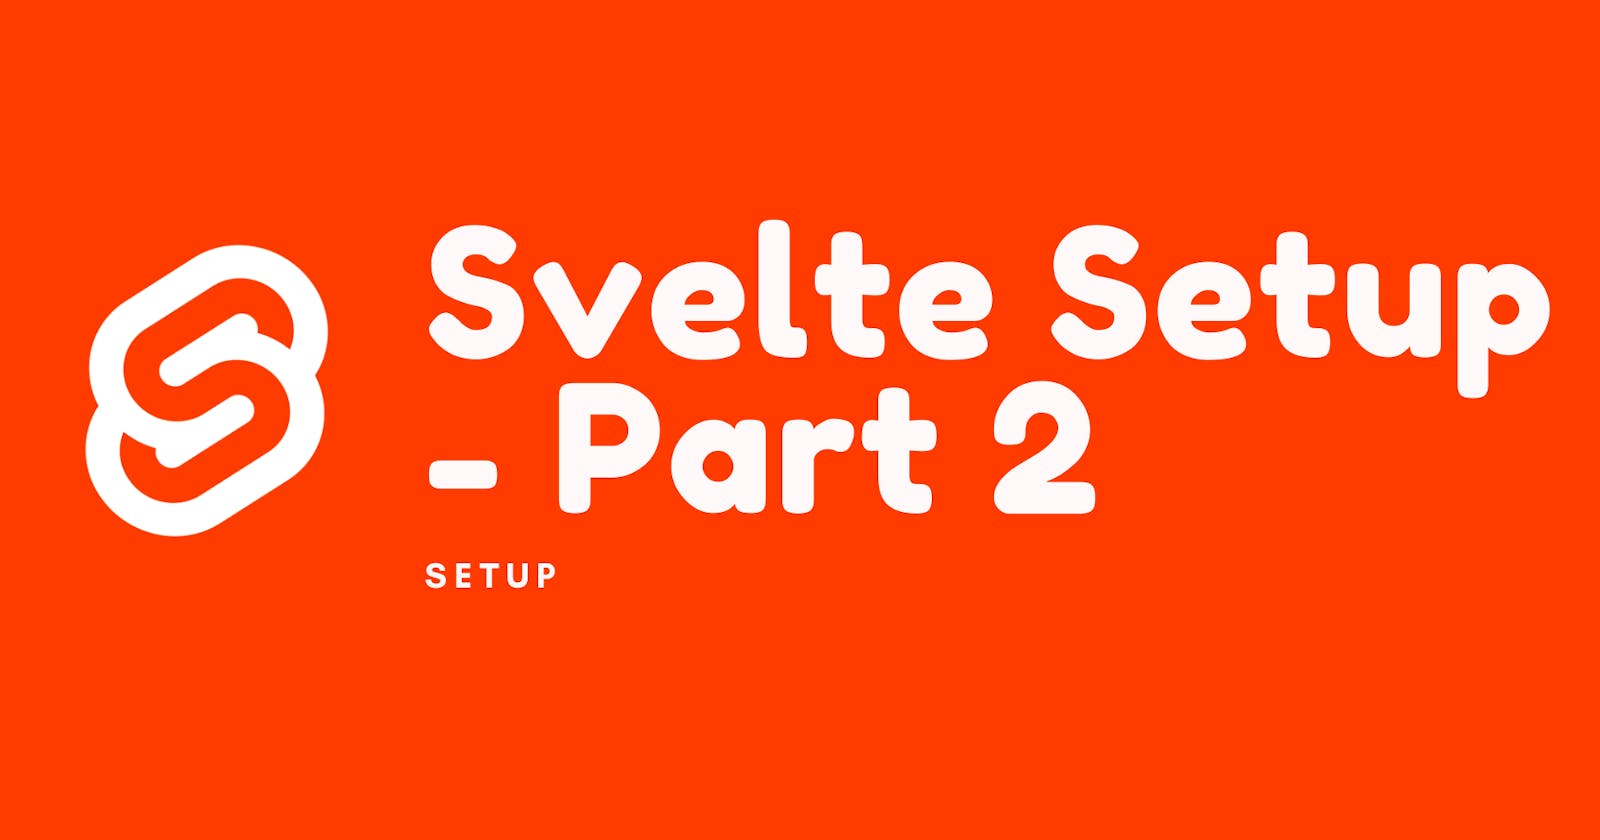 Setting up for SVELTE